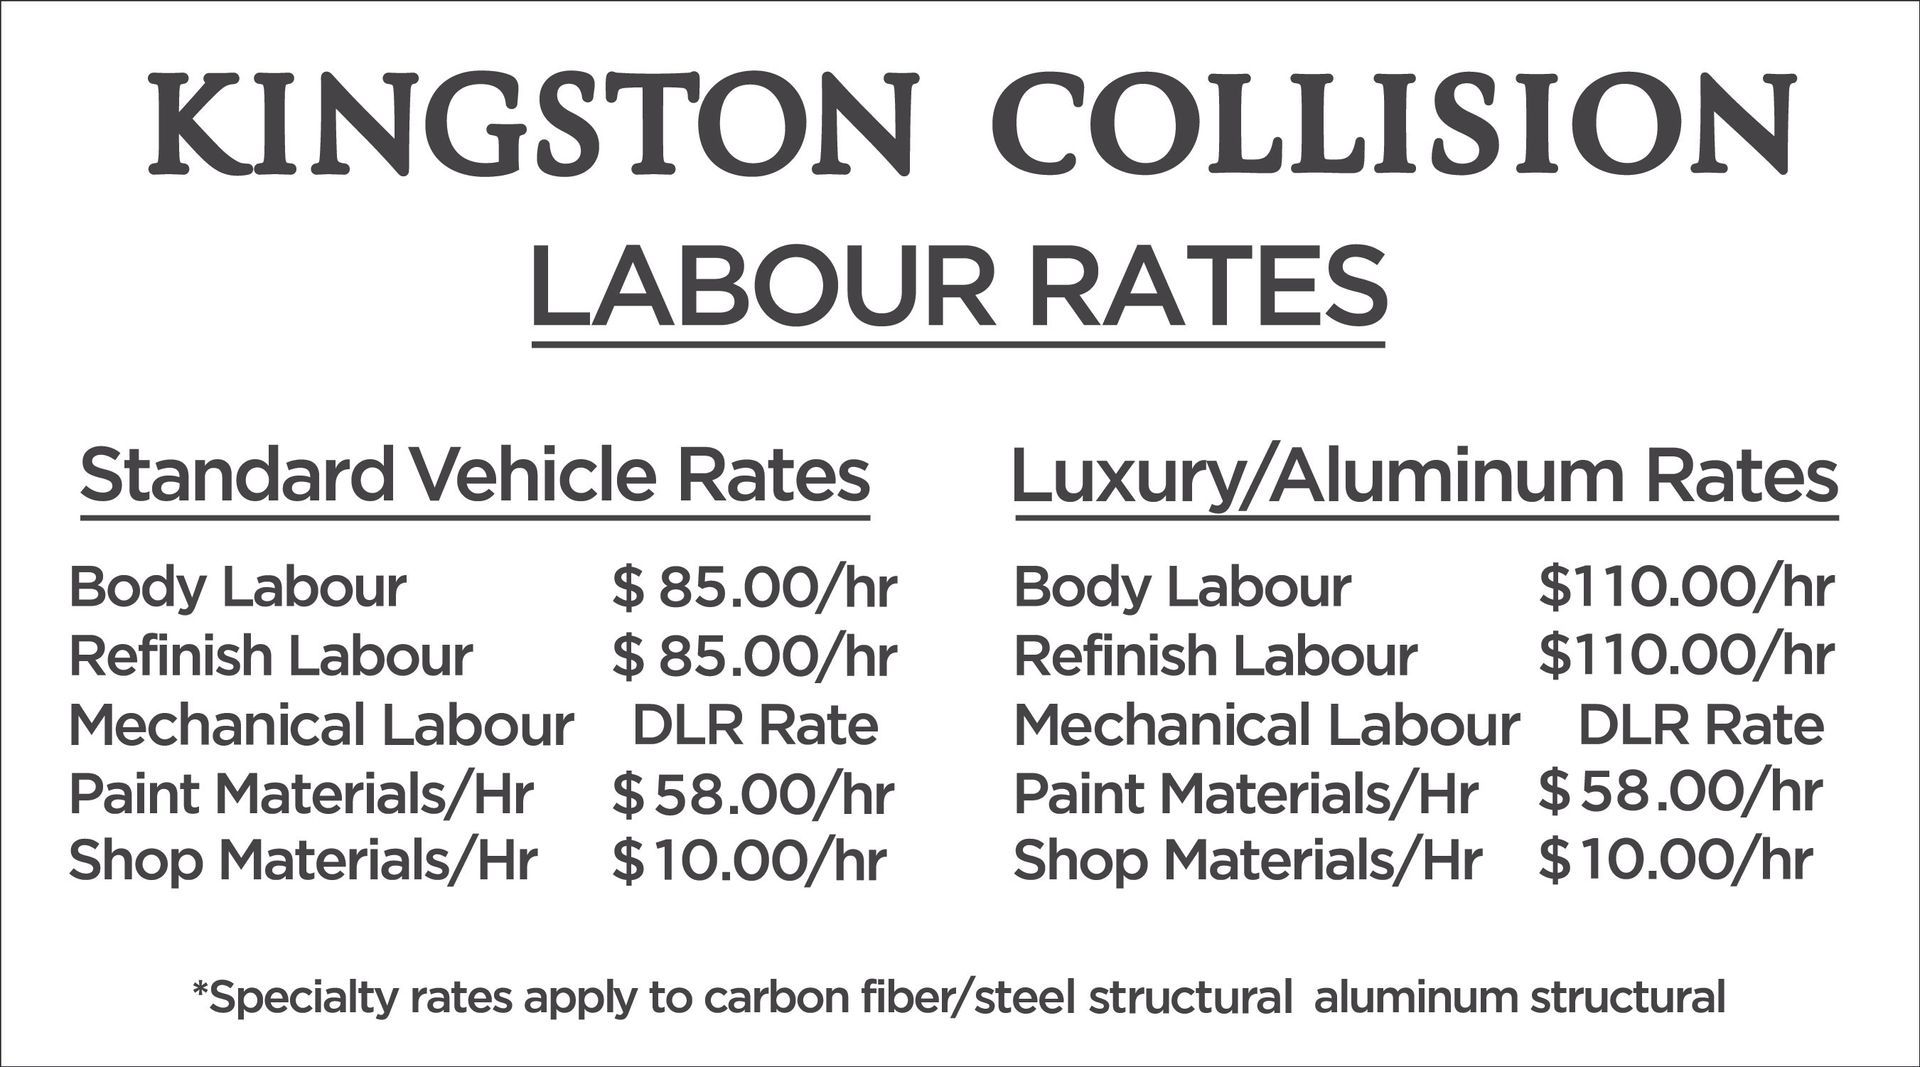 Kingston collision labour rates for standard vehicle rates and luxury / aluminum rates